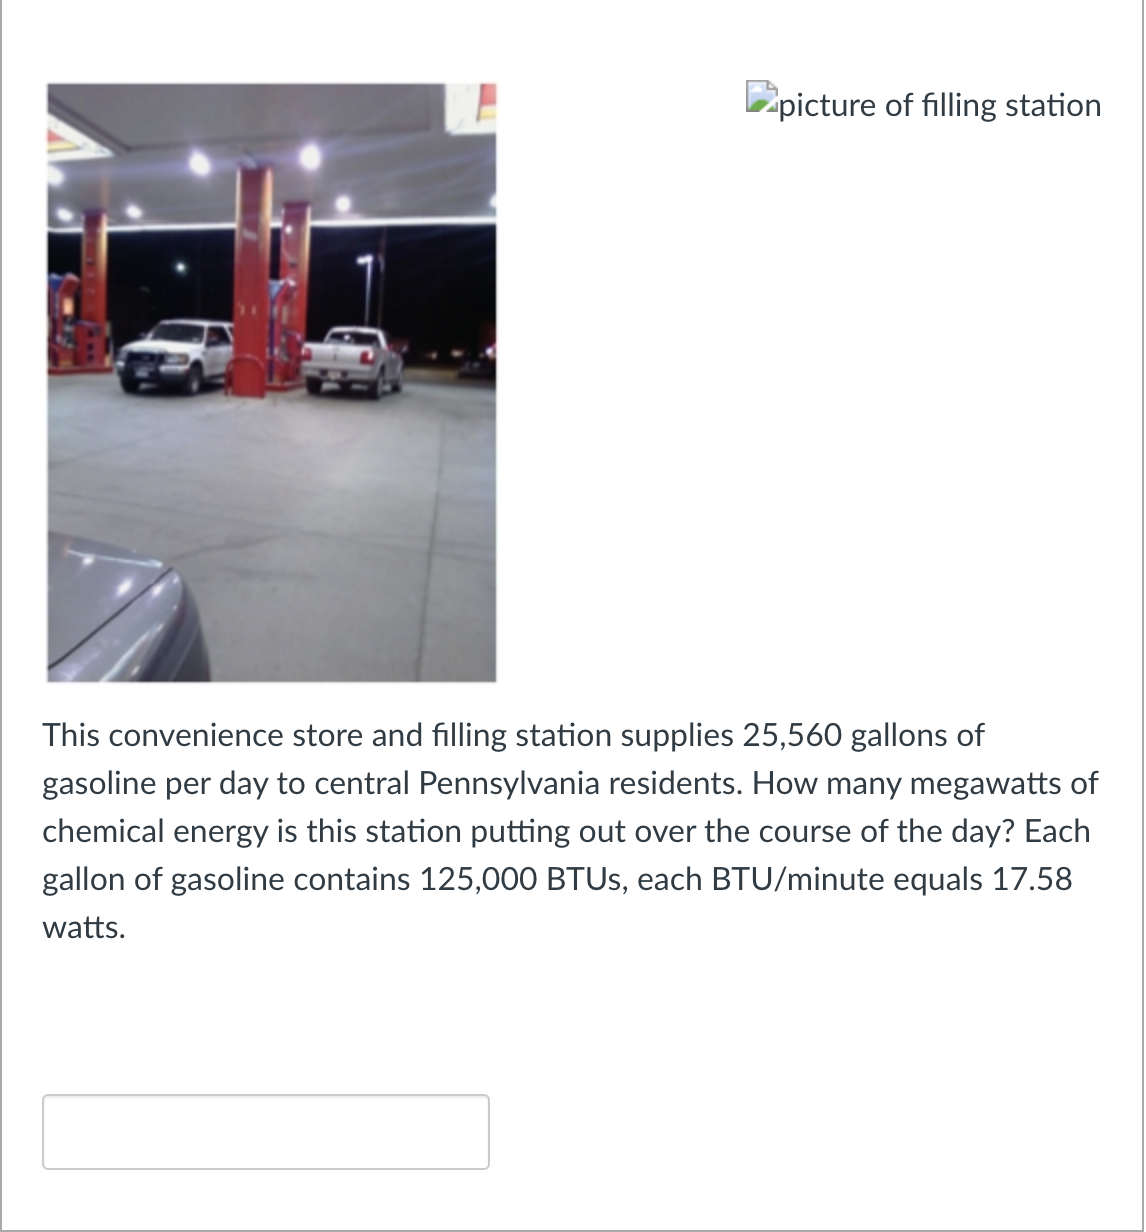 picture of filling station
This convenience store and filling station supplies 25,560 gallons of
gasoline per day to central Pennsylvania residents. How many megawatts of
chemical energy is this station putting out over the course of the day? Each
gallon of gasoline contains 125,000 BTUS, each BTU/minute equals 17.58
watts.
